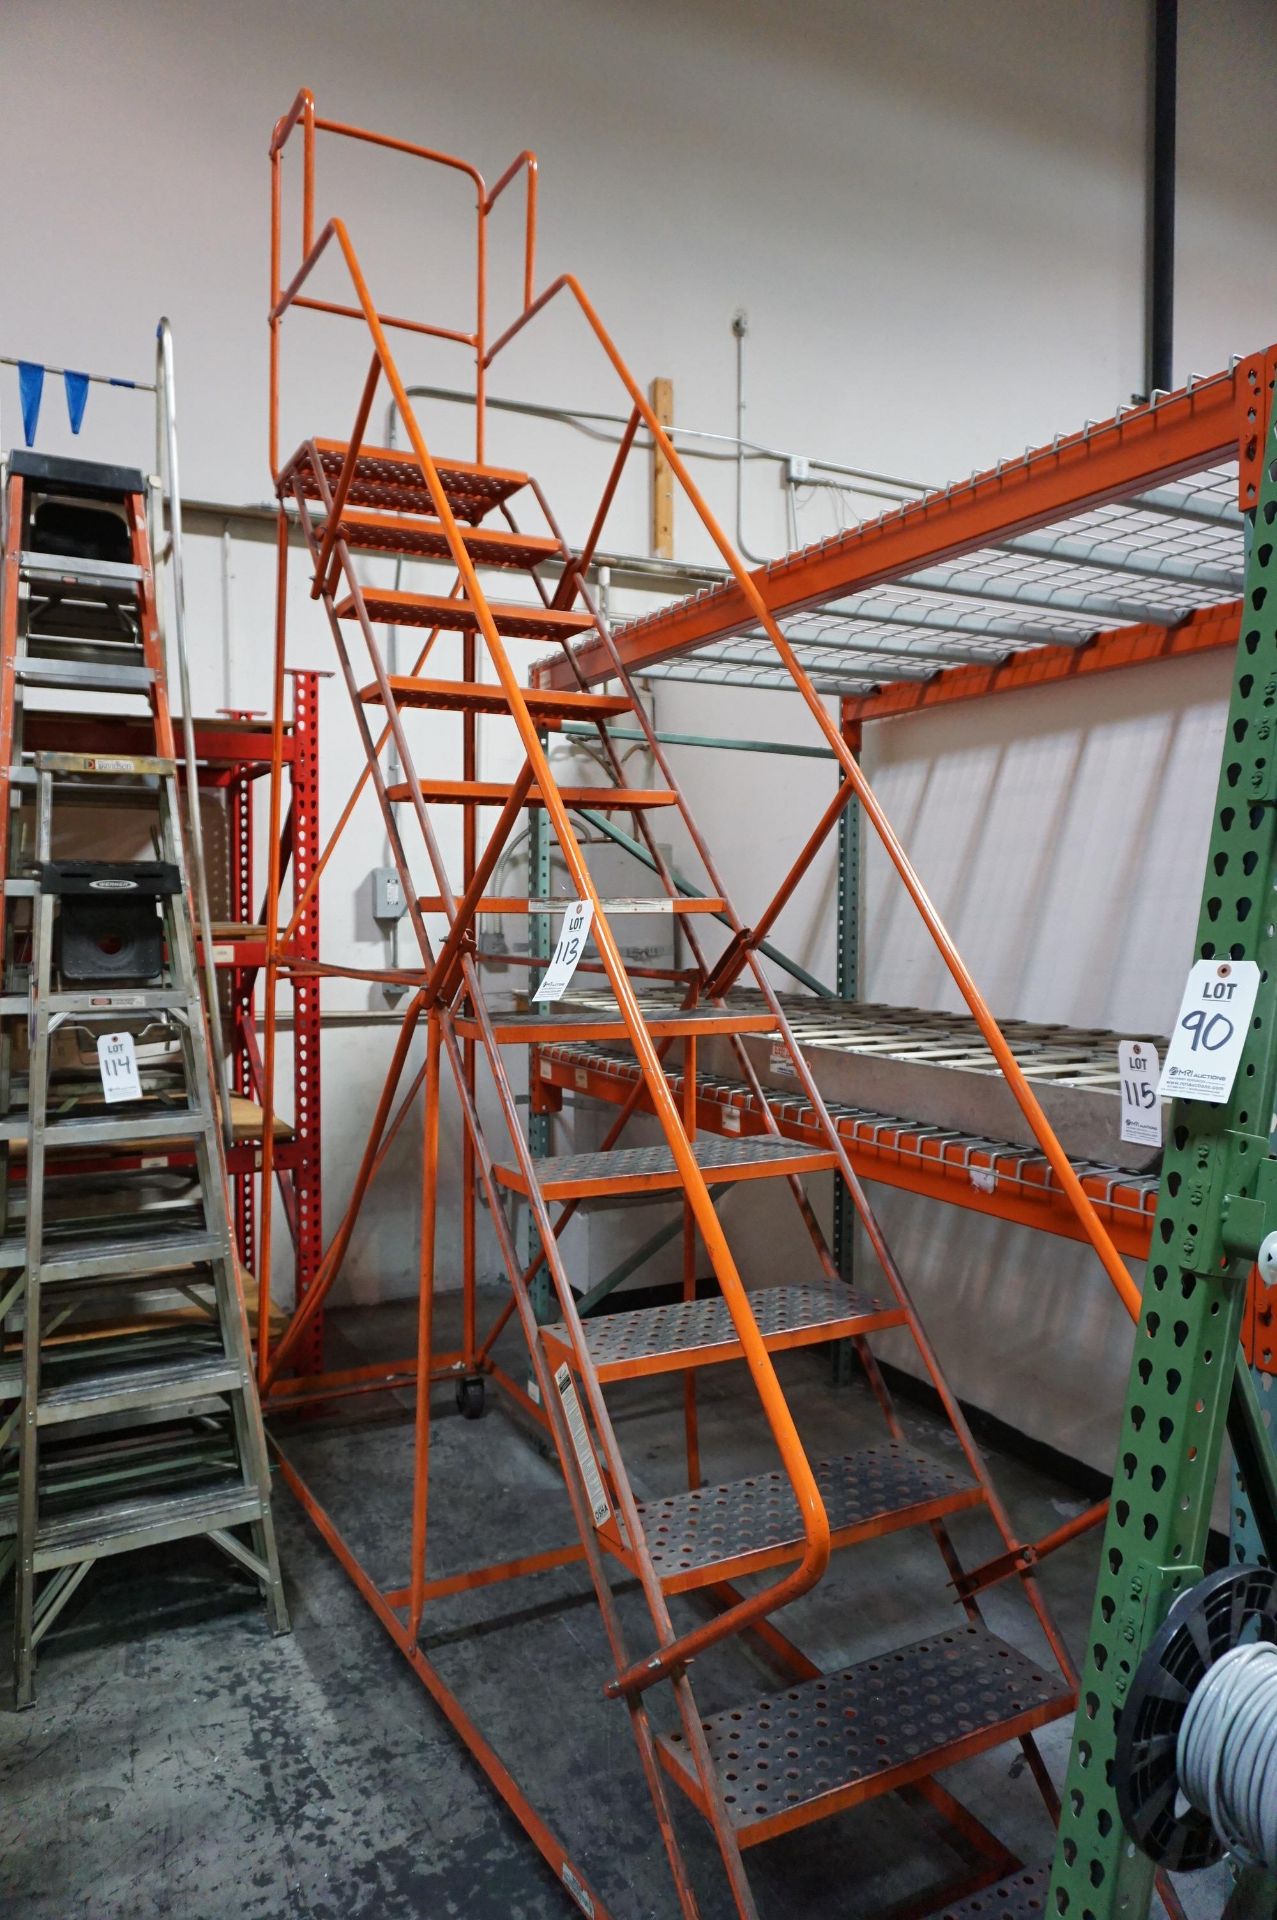 12' ROLLING INVENTORY LADDER WITH SUPPORT BARS, 12 STEP LADDER, OSHA CERTIFIED- *LATE PICK UP*